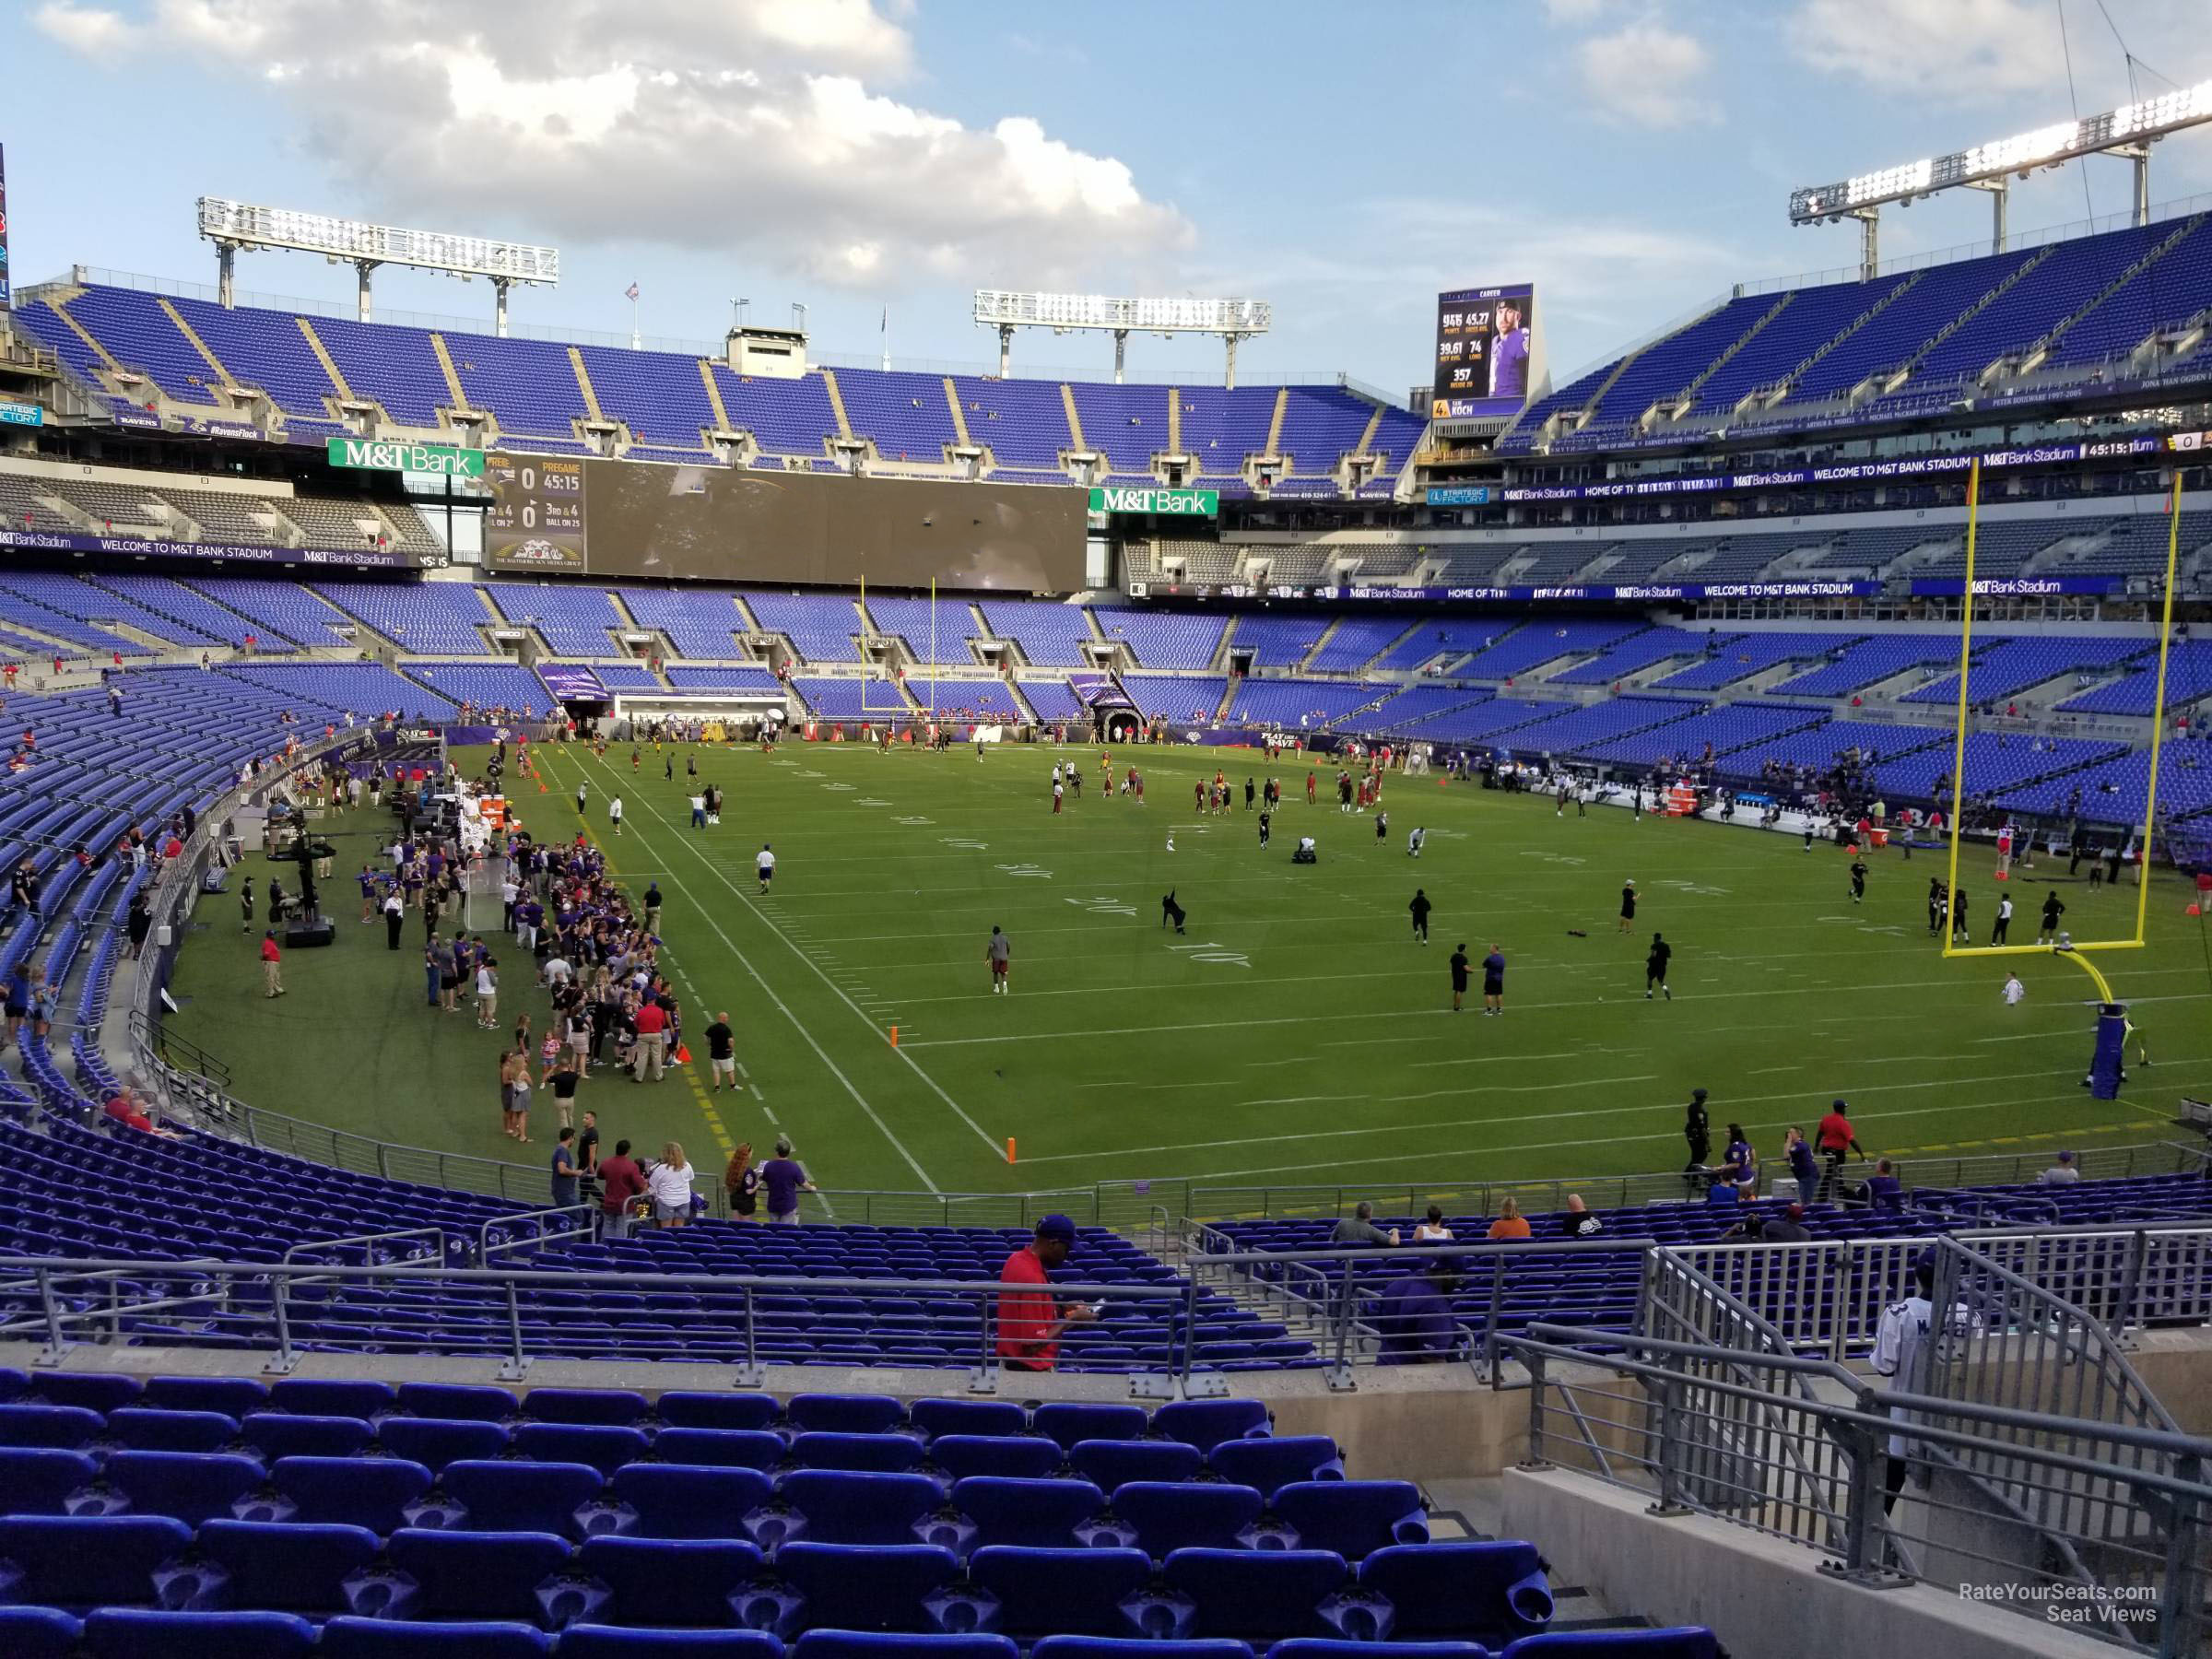 section 144, row 28 seat view  for football - m&t bank stadium